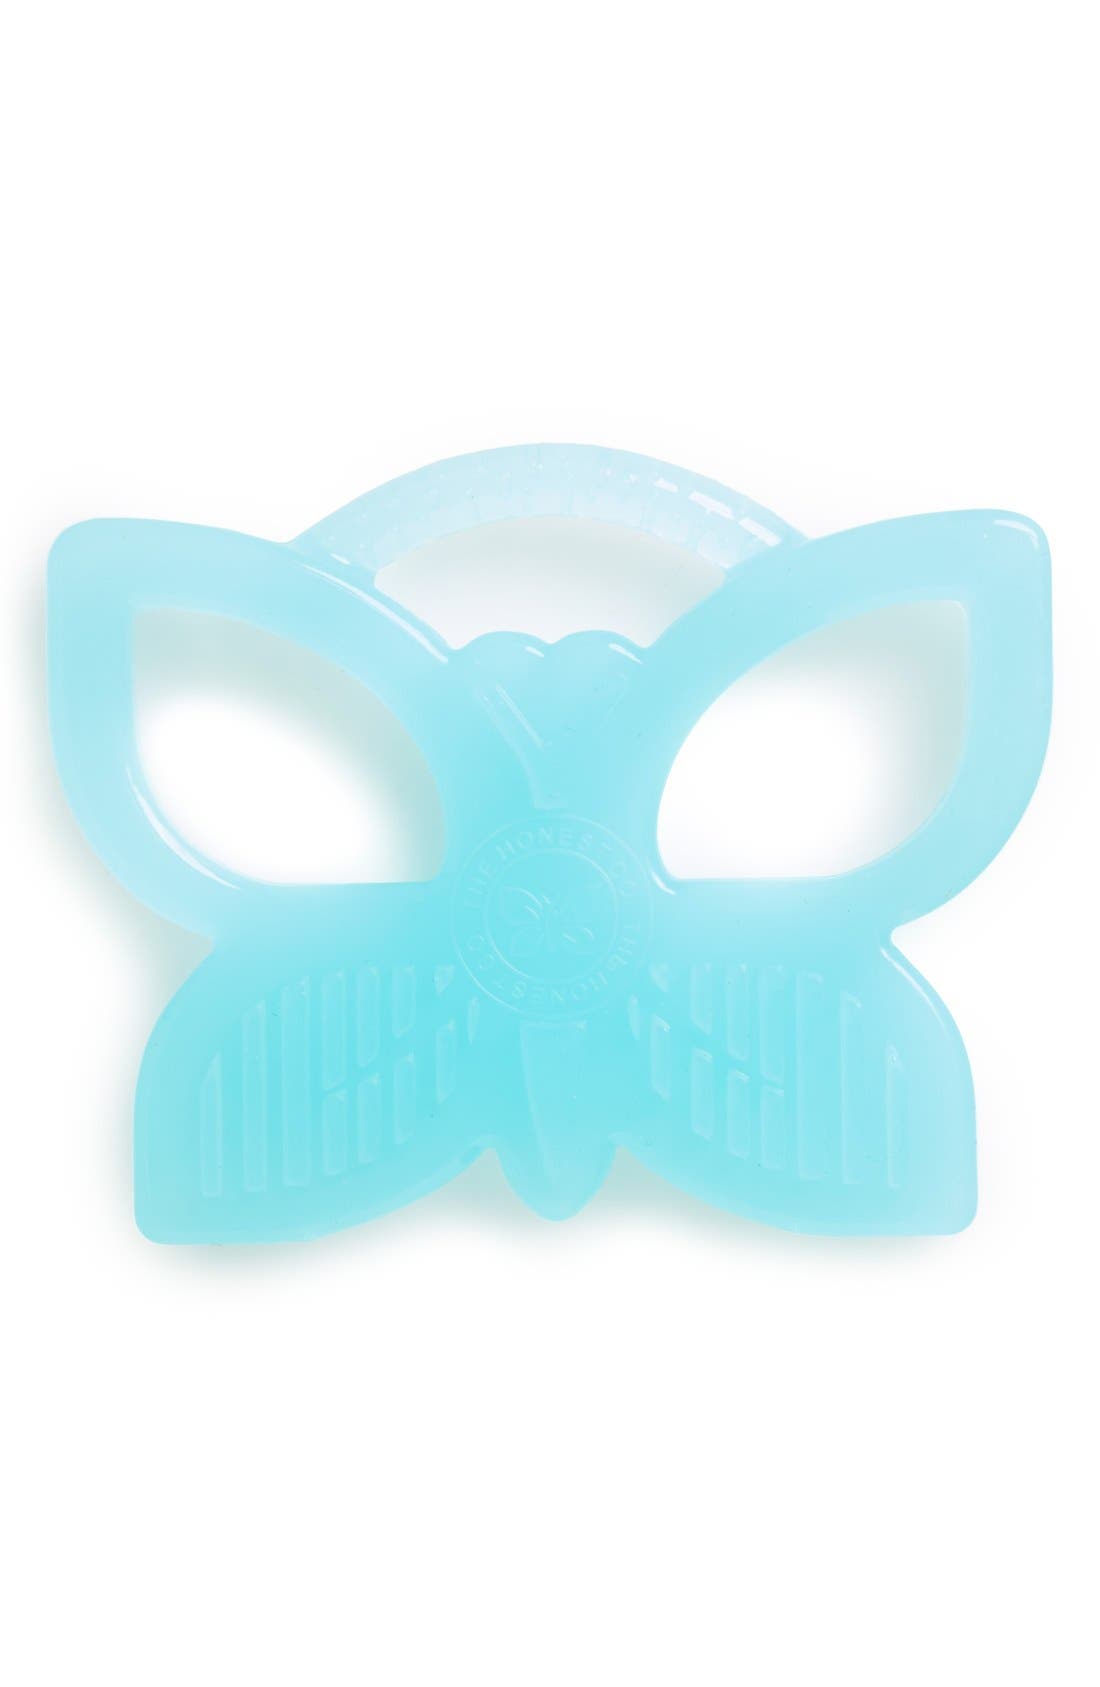 The Honest Company Baby Teether | Nordstrom